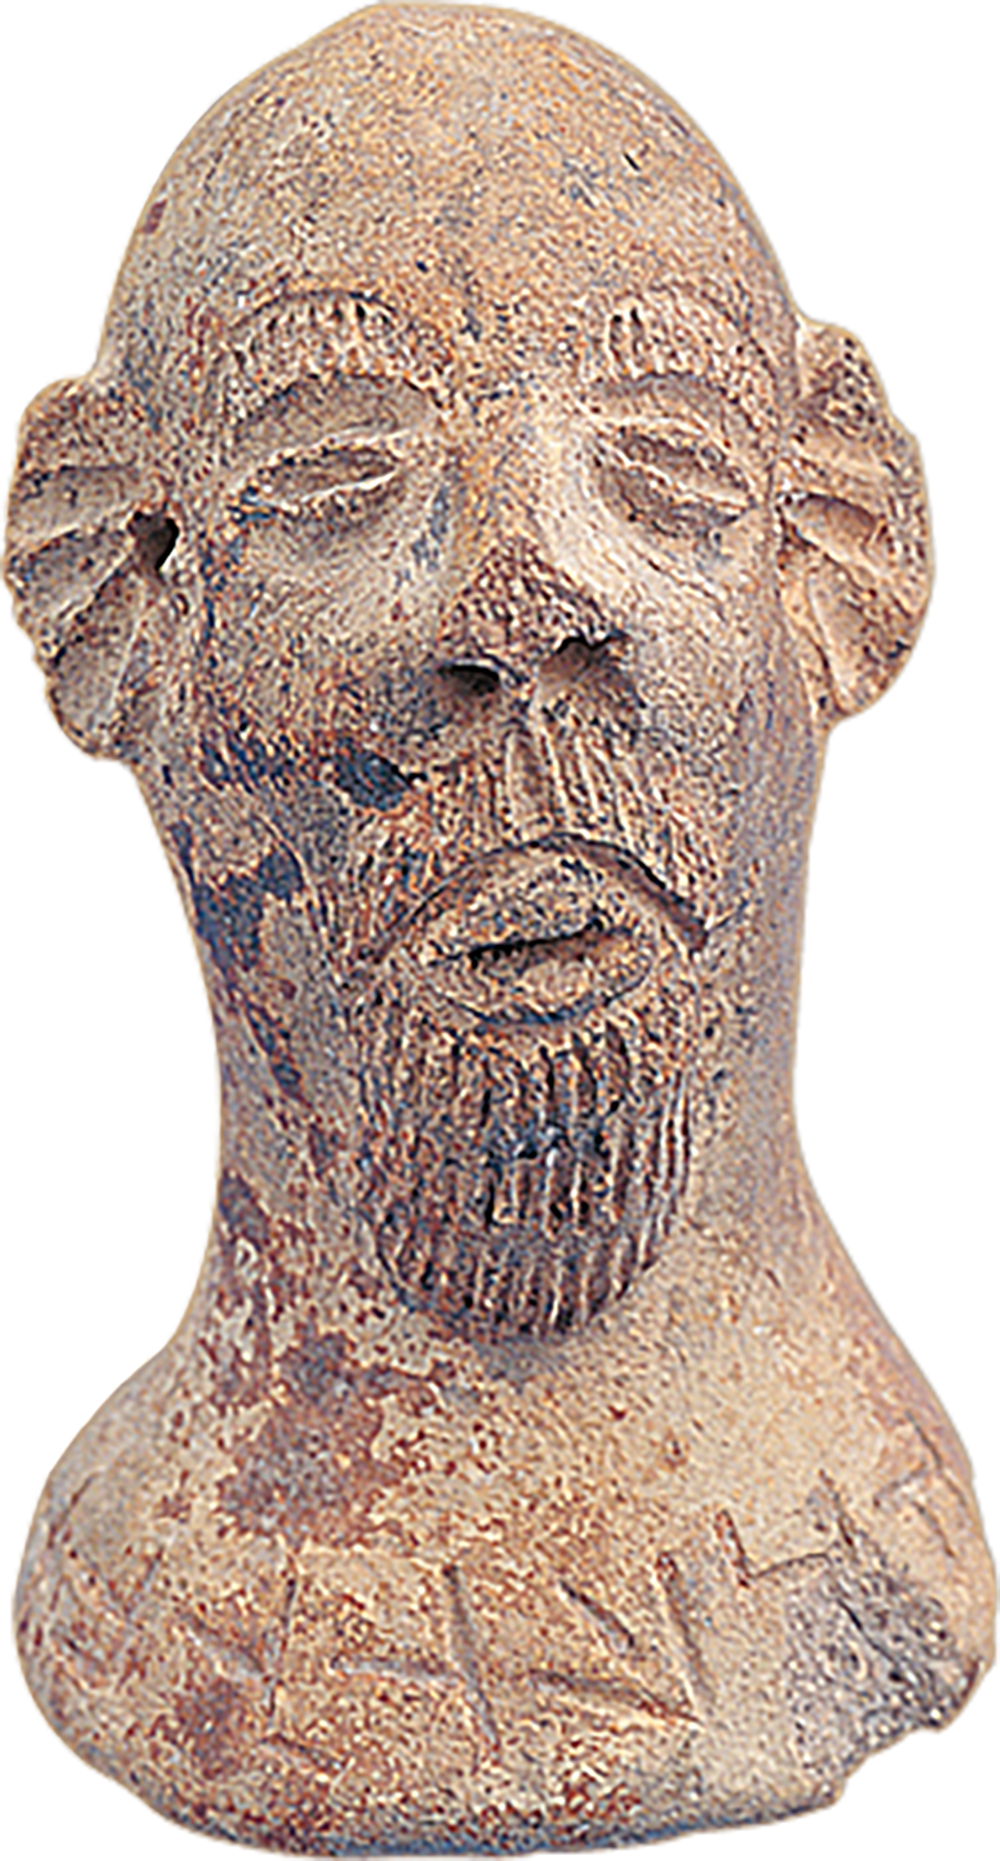 A pottery figure of a foreigner who came to Judea while the Jews were in captivity in Babylon